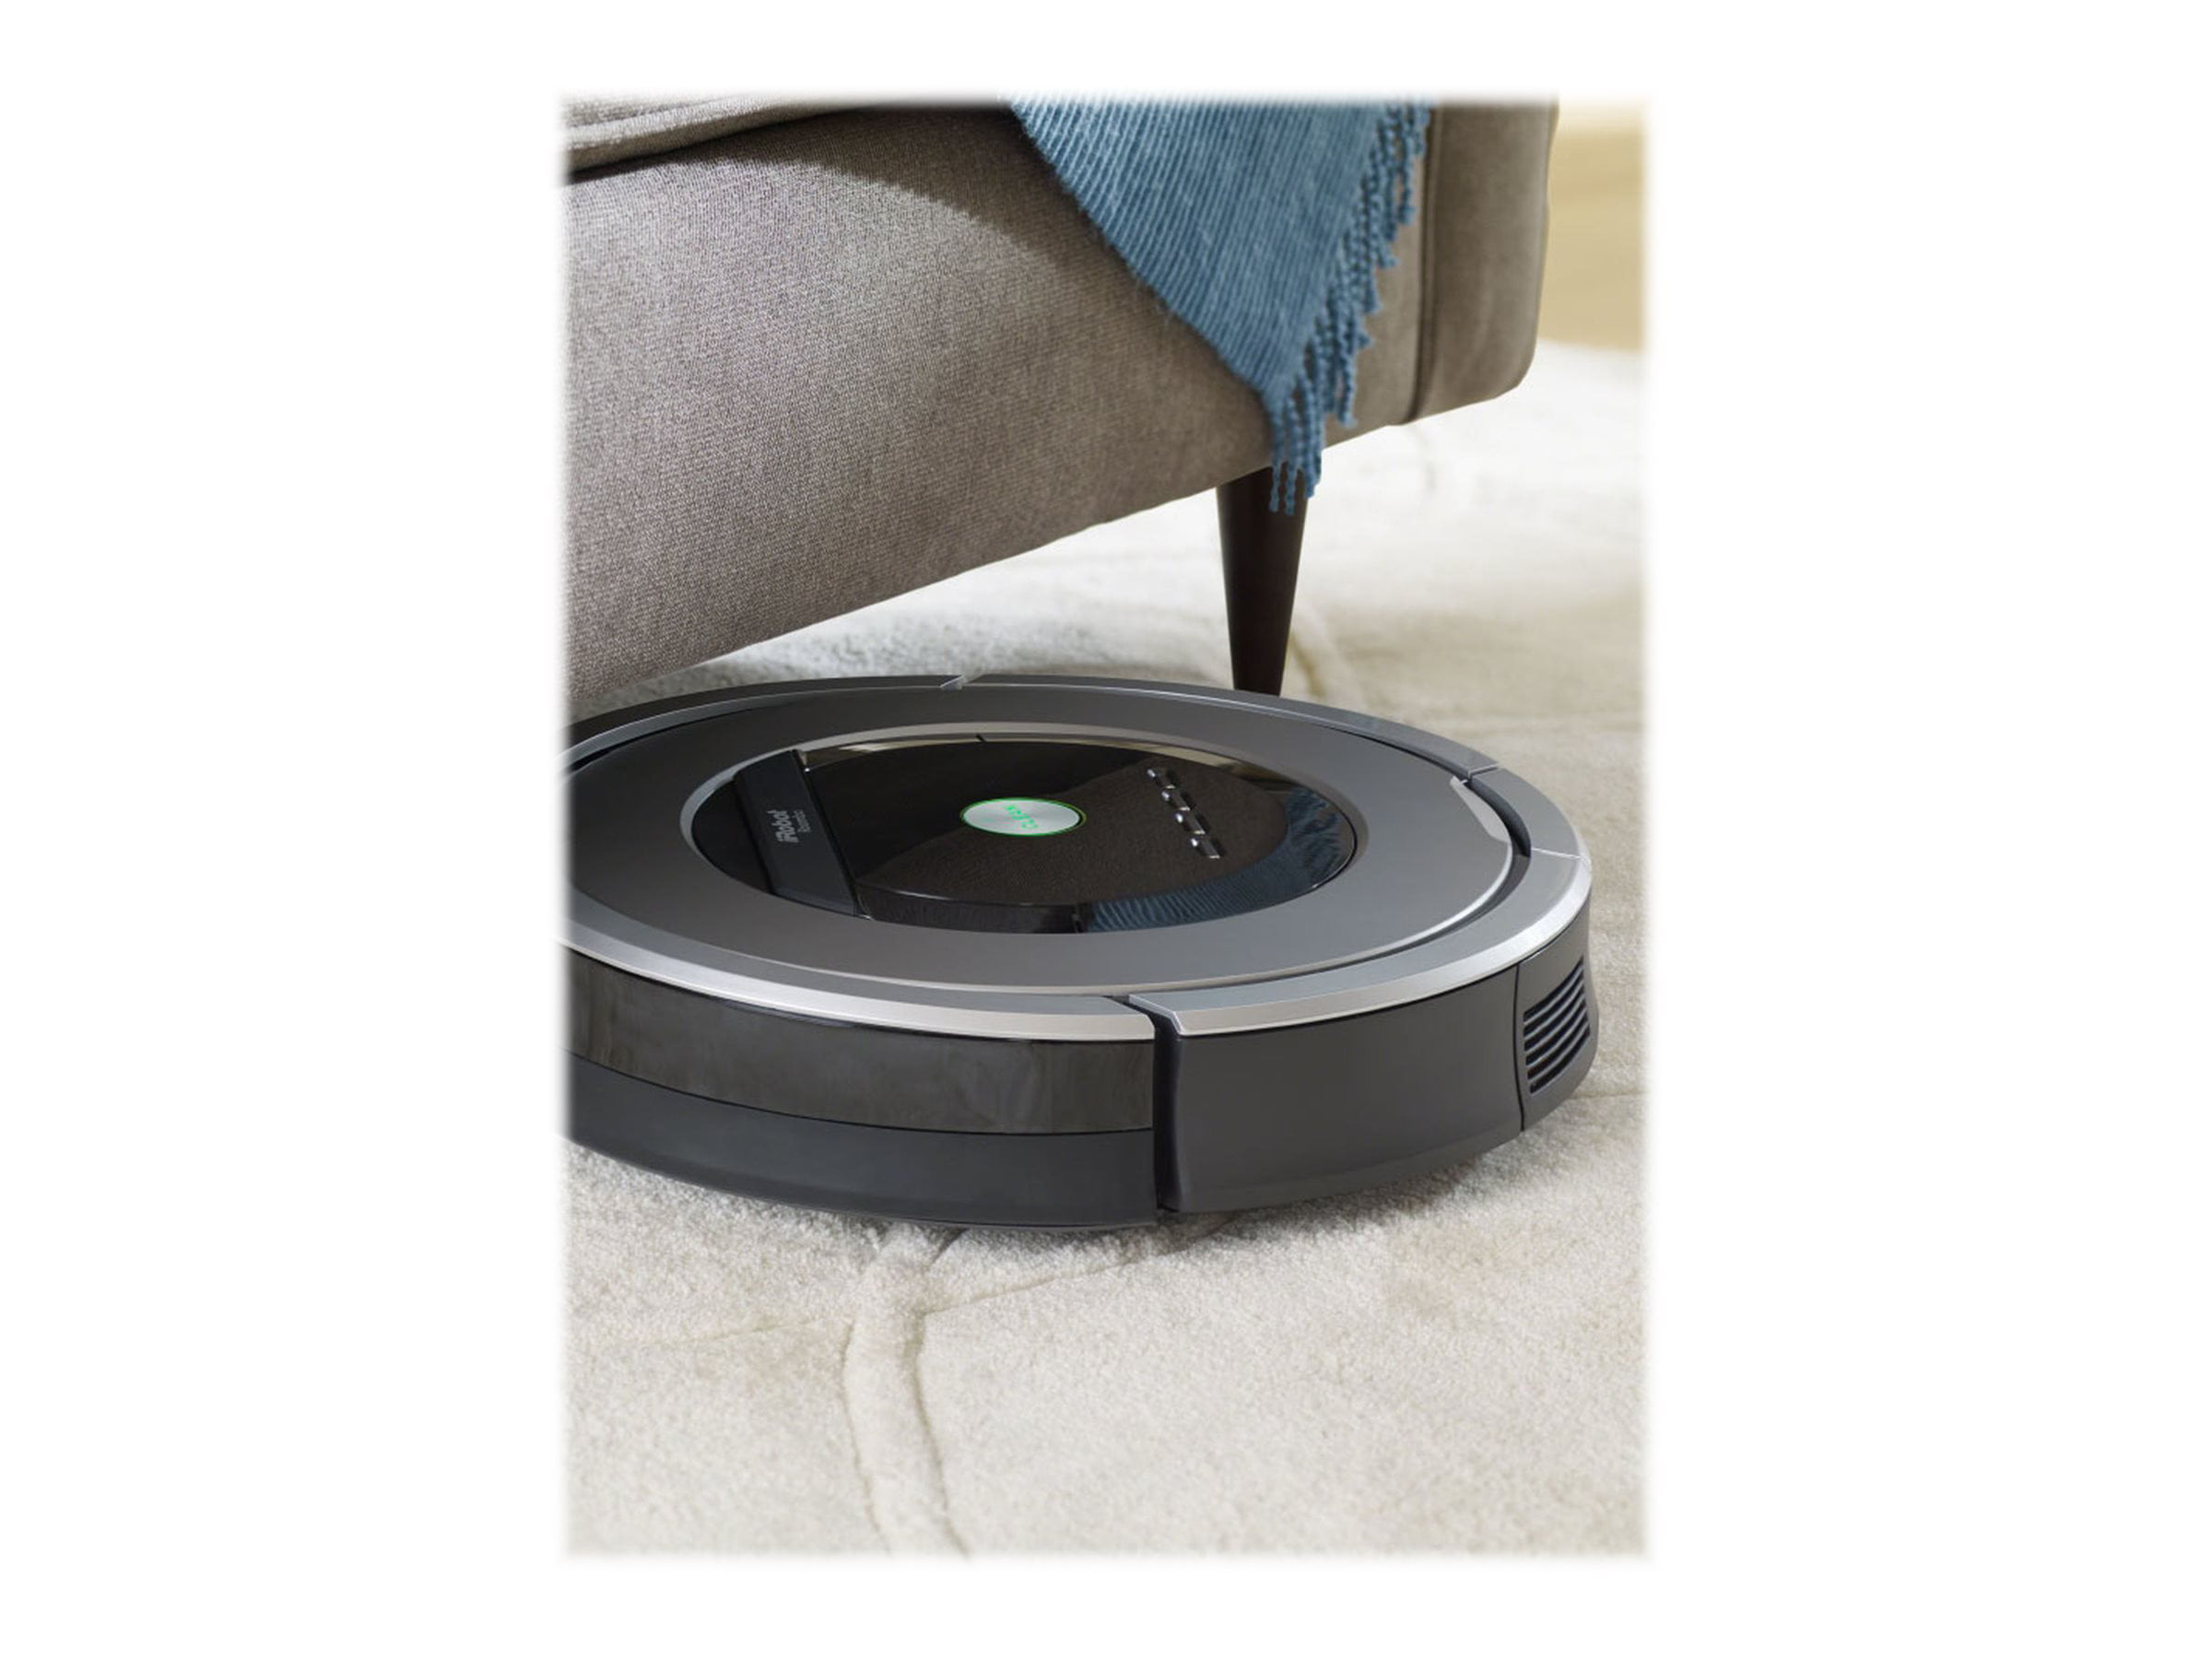 iRobot Roomba 860 Vacuum Cleaning Robot — QVC.com, Can anyone tell me if  these work well? I am trying to find someth…